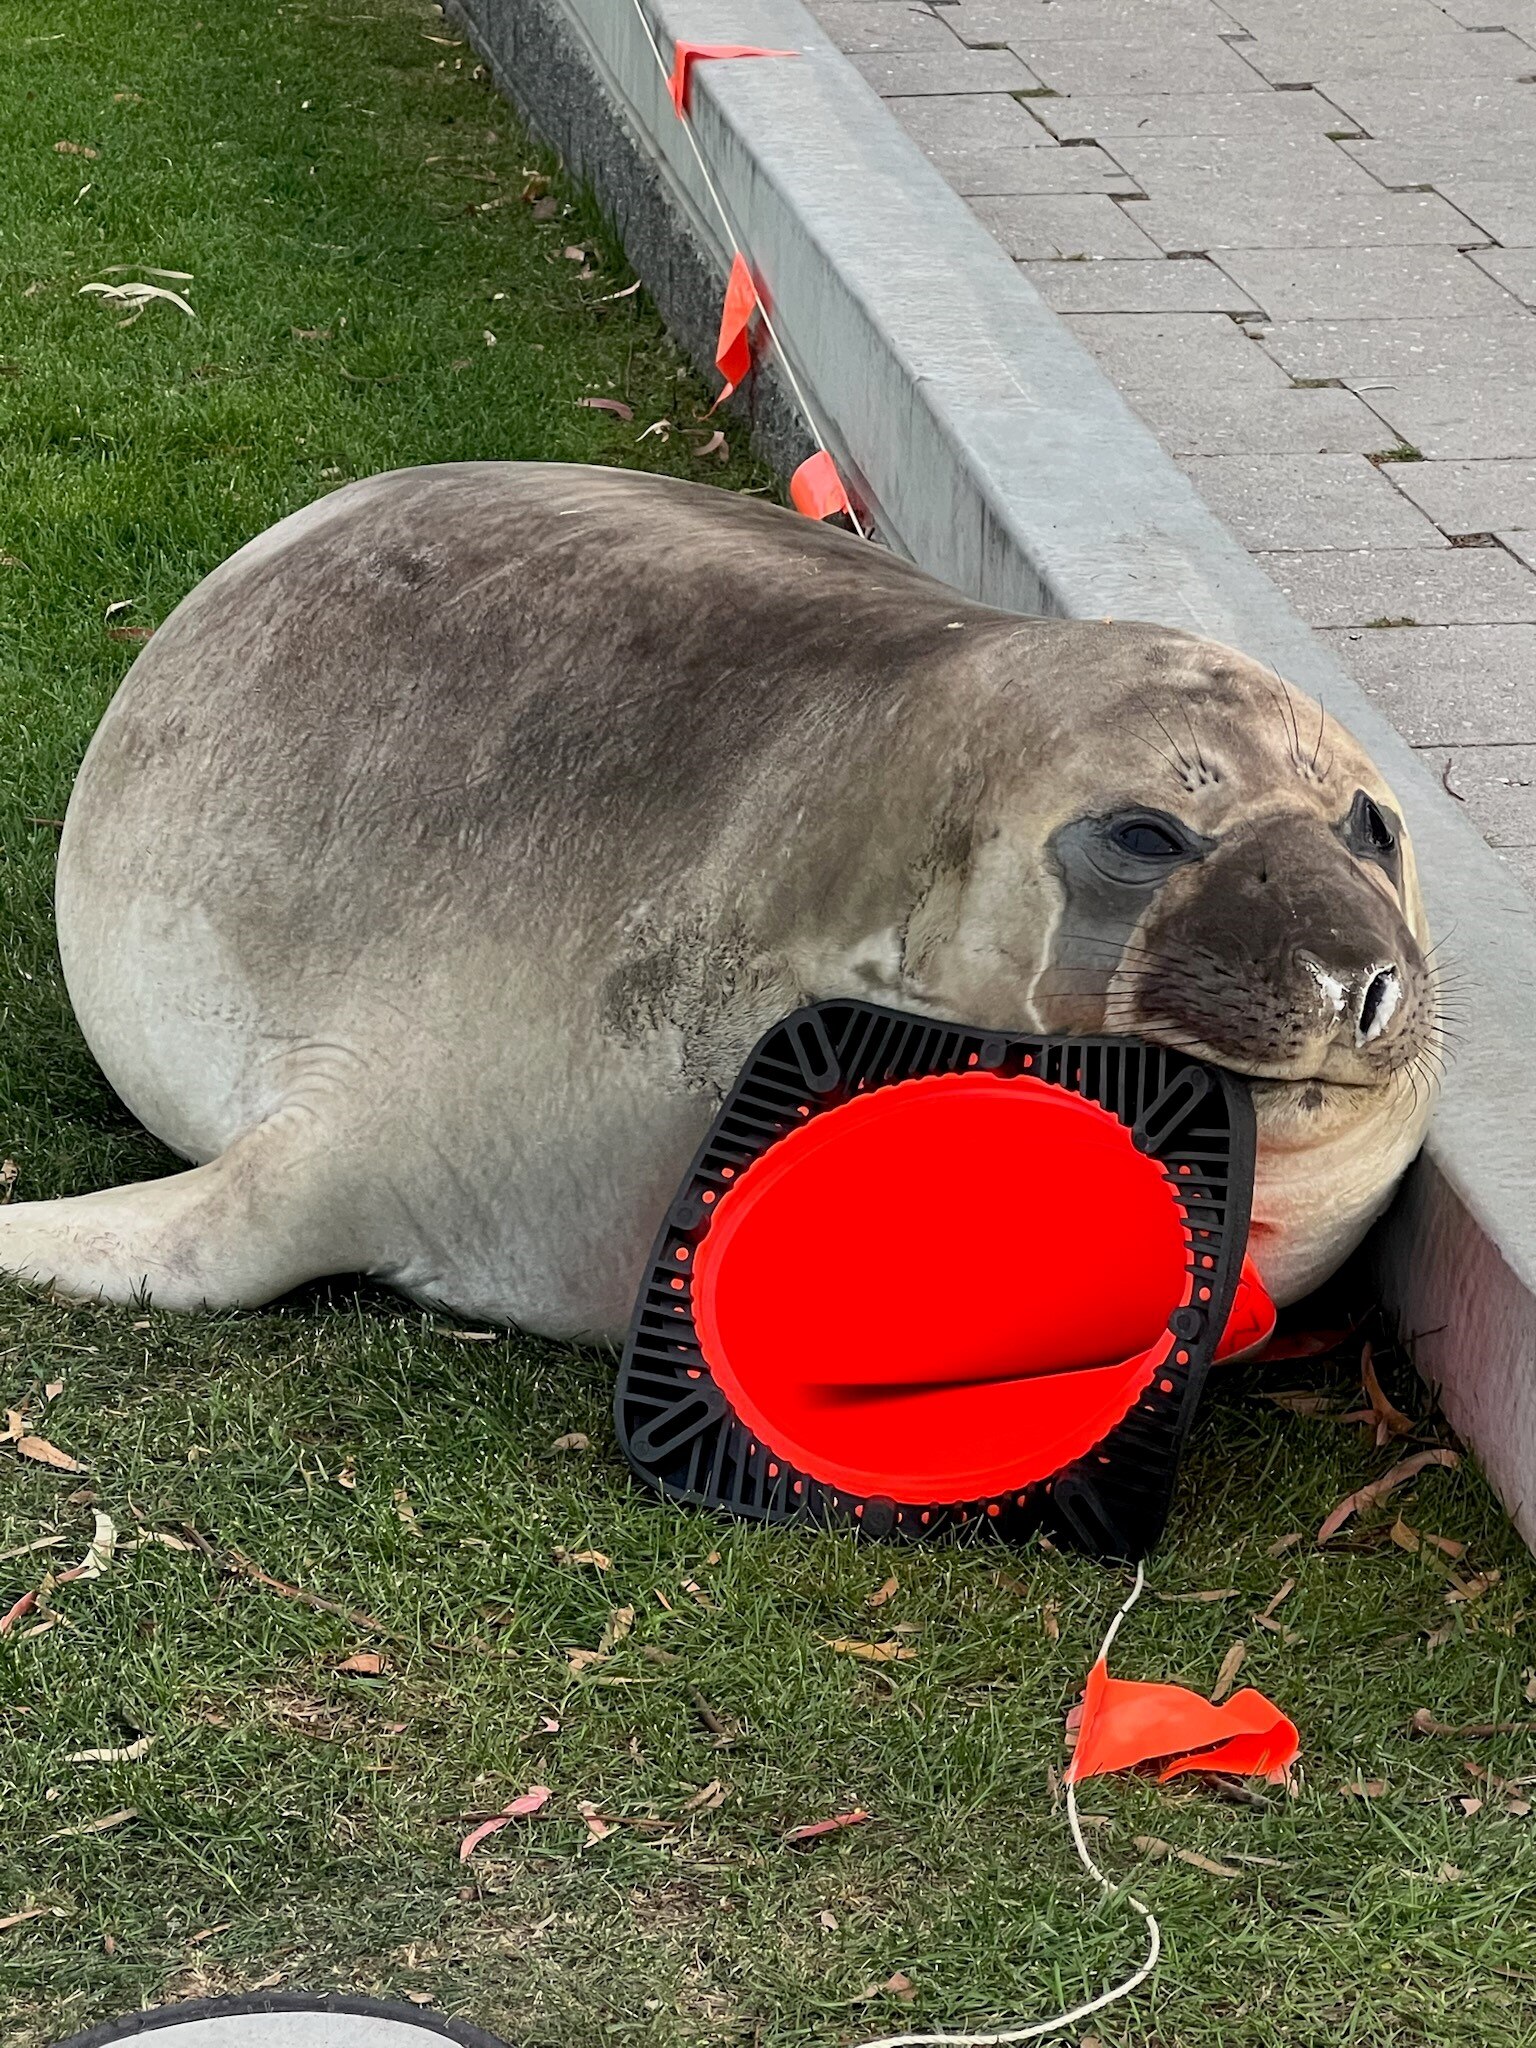 Neil the seal' back on dry land again in Tasmania with authorities pleading  for commonsense from onlookers